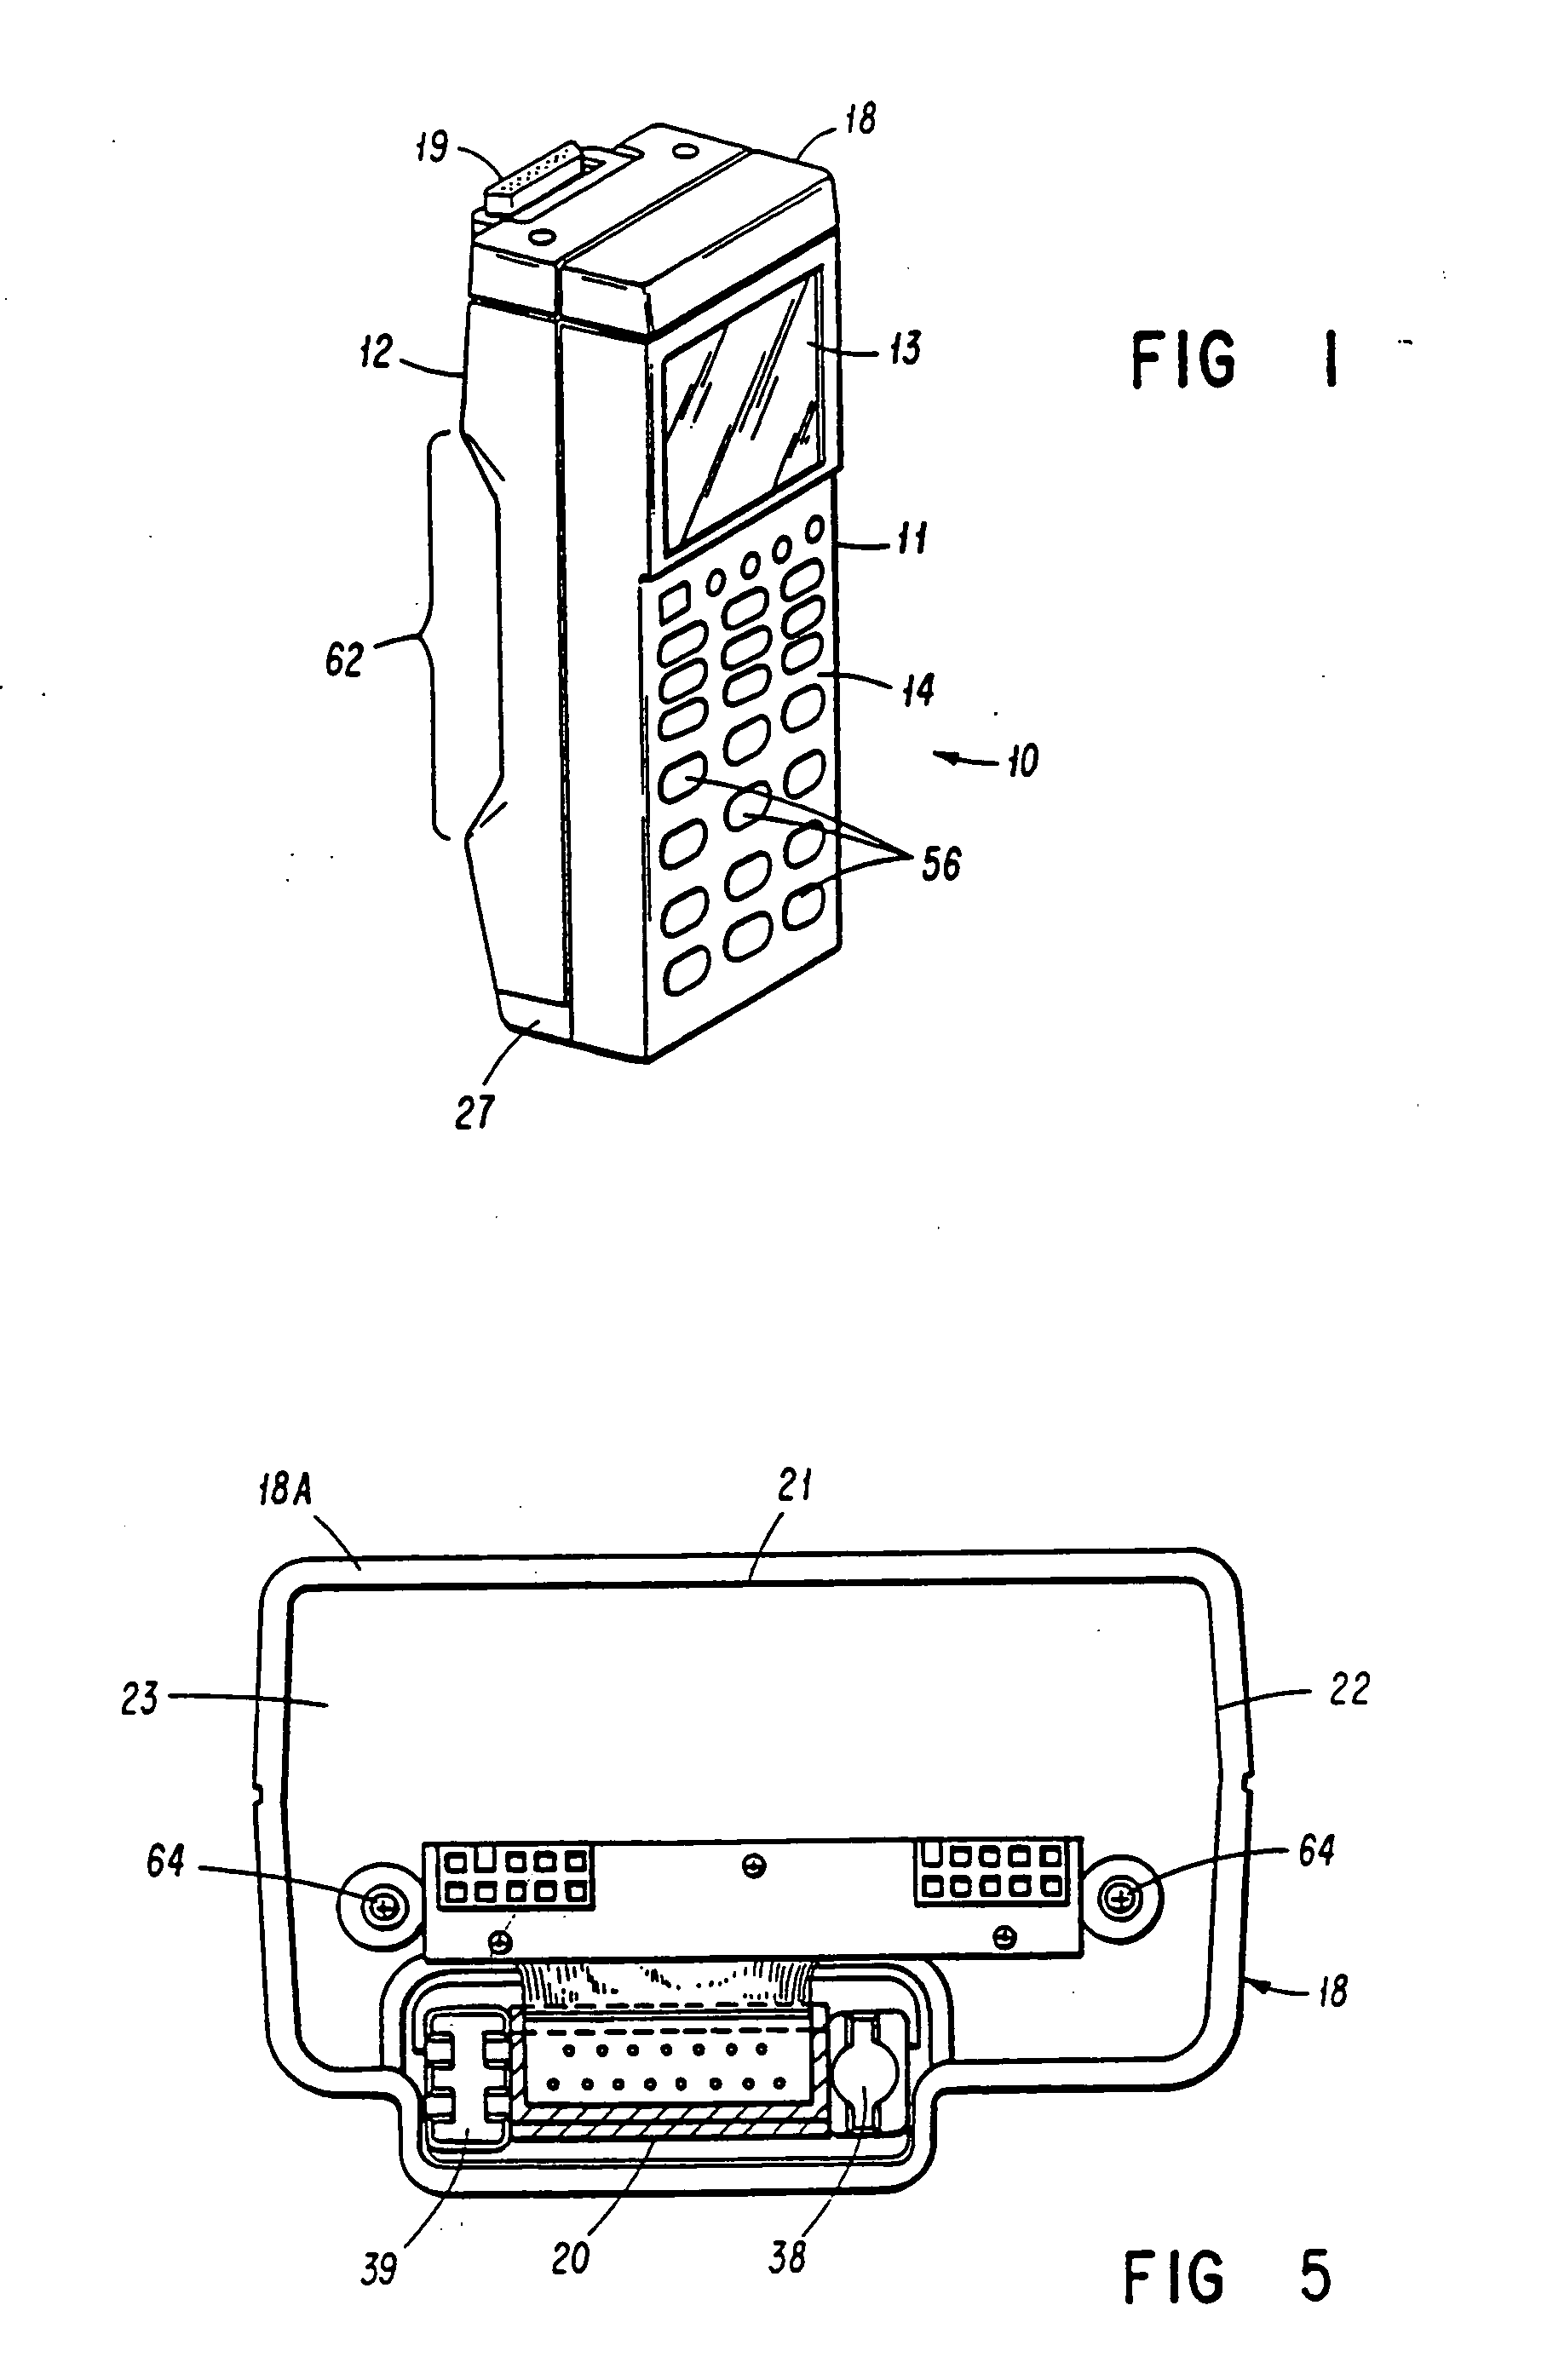 Hand-held data capture system with interchangeable modules